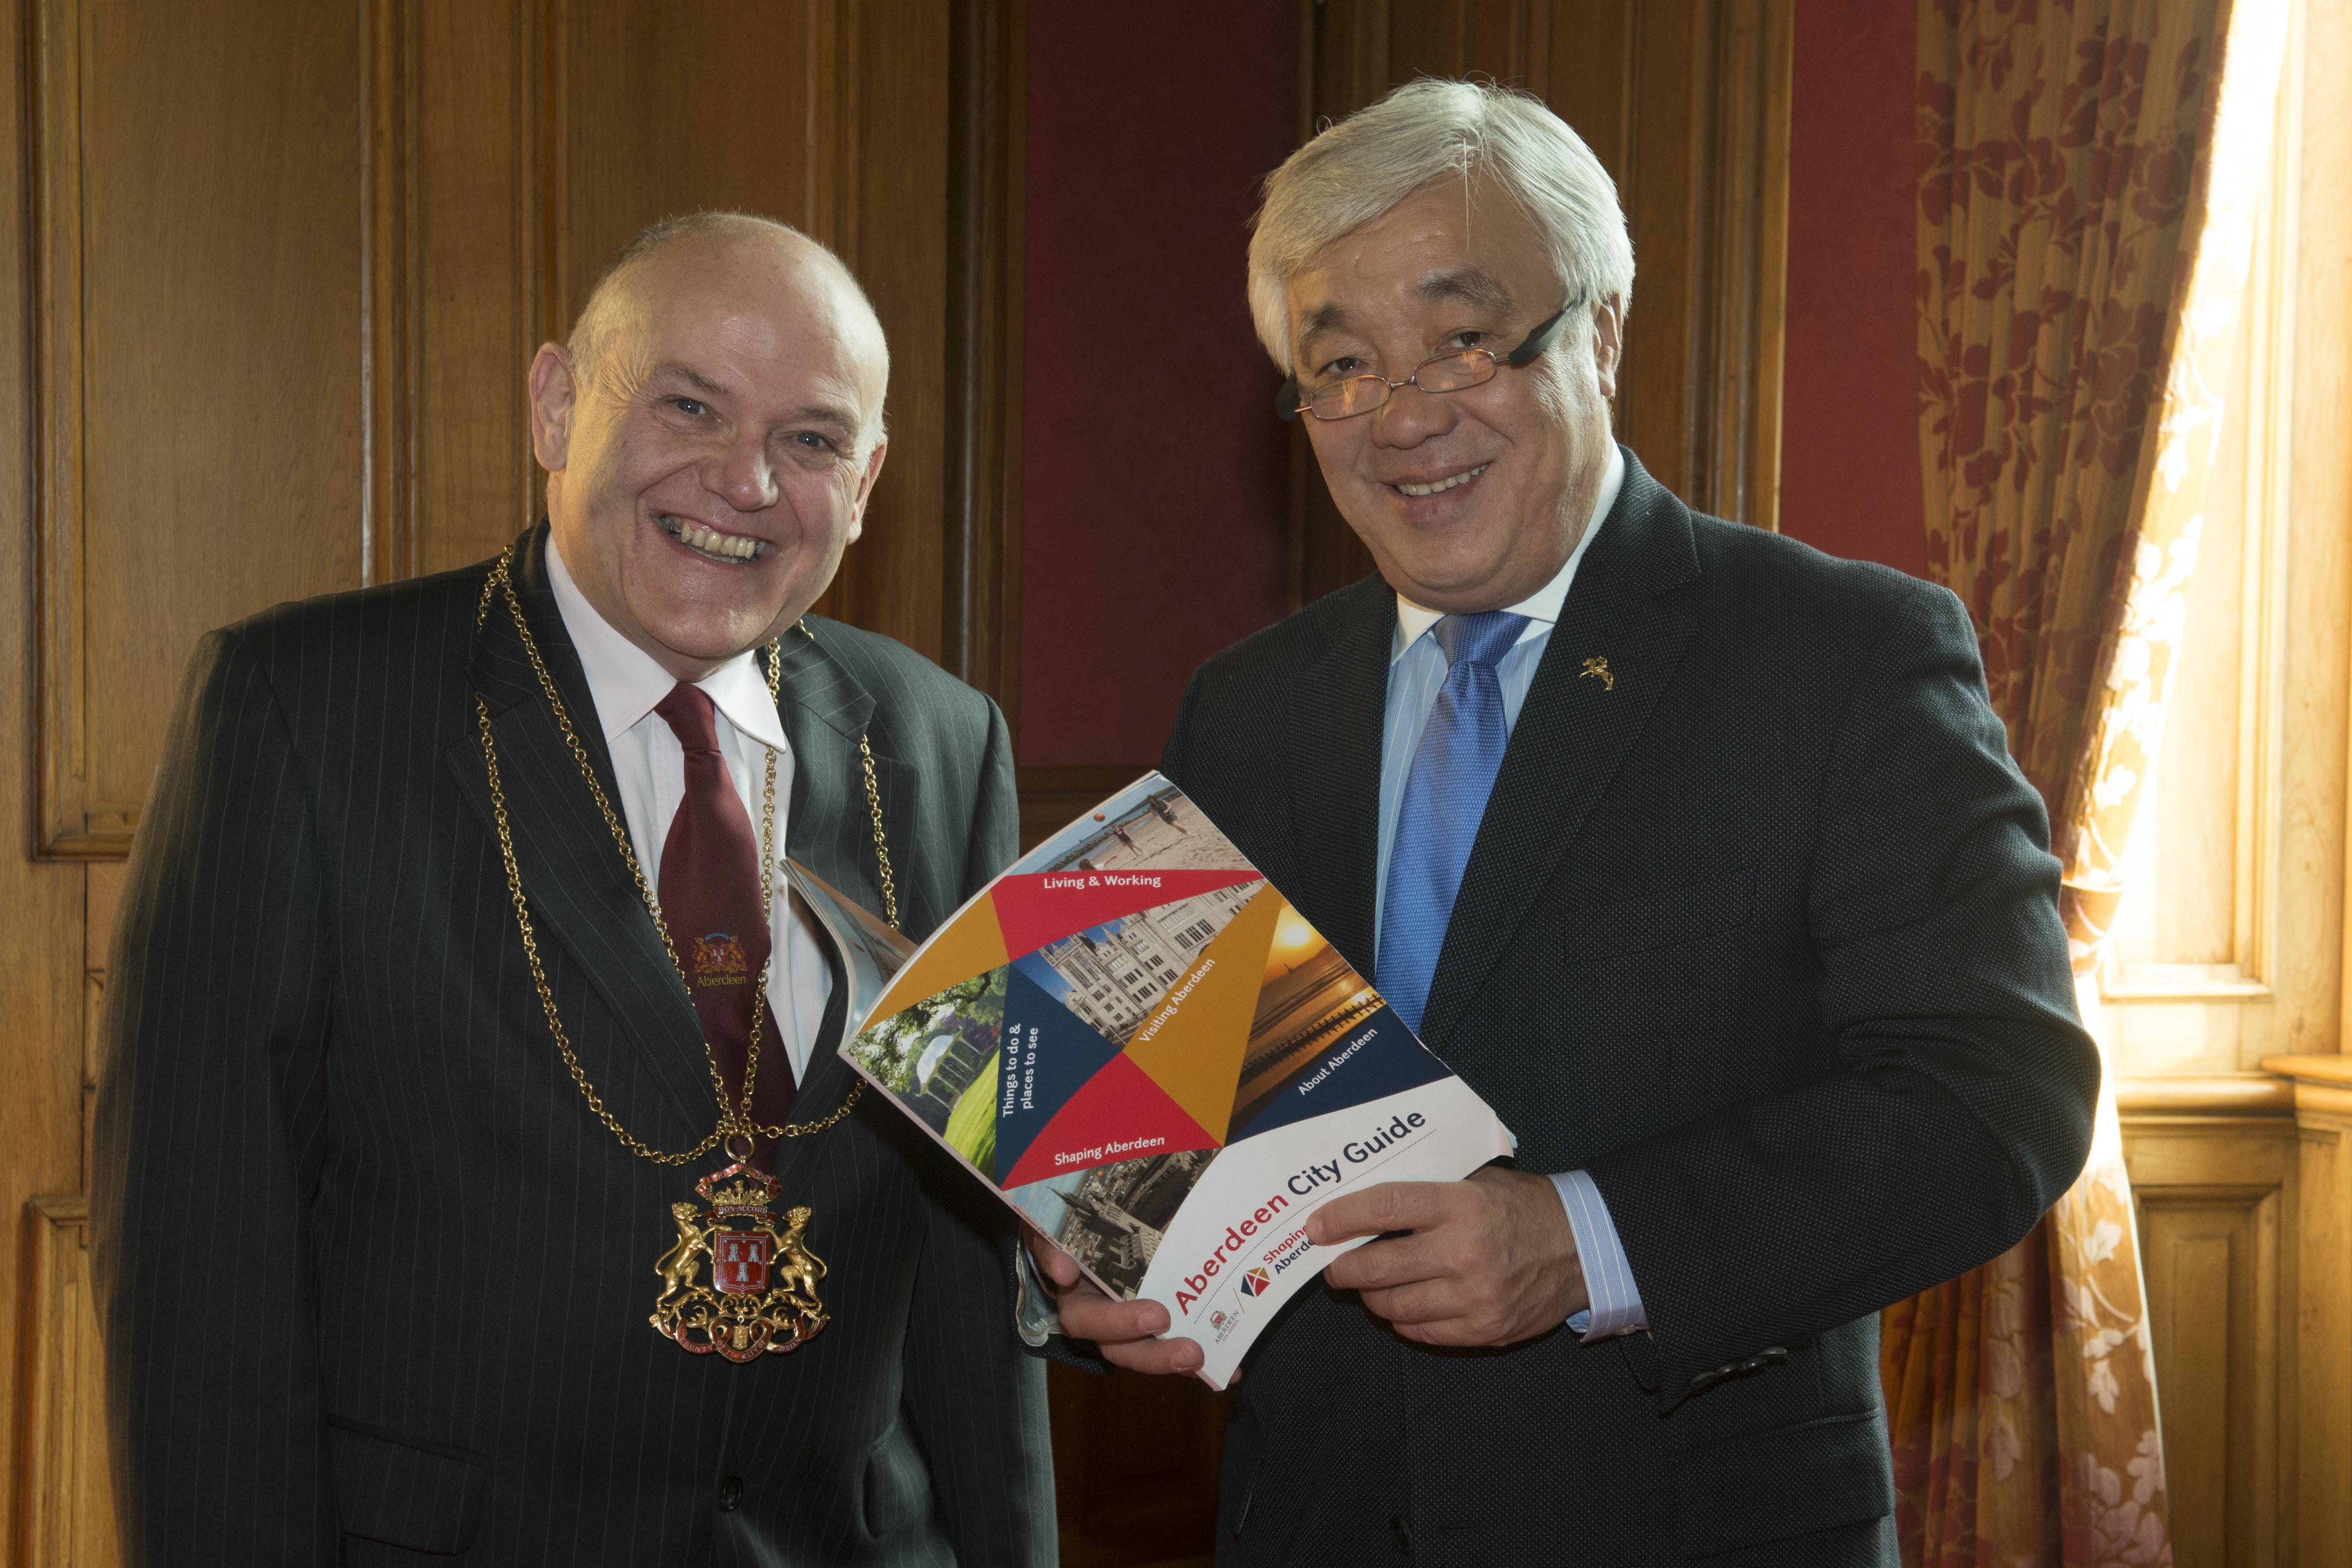 16/11/18 The Lord Provost mey His Excellency Erlan Idrissov the Ambassador of Kazakhstan along with his Assistant Rustam Tazhenov